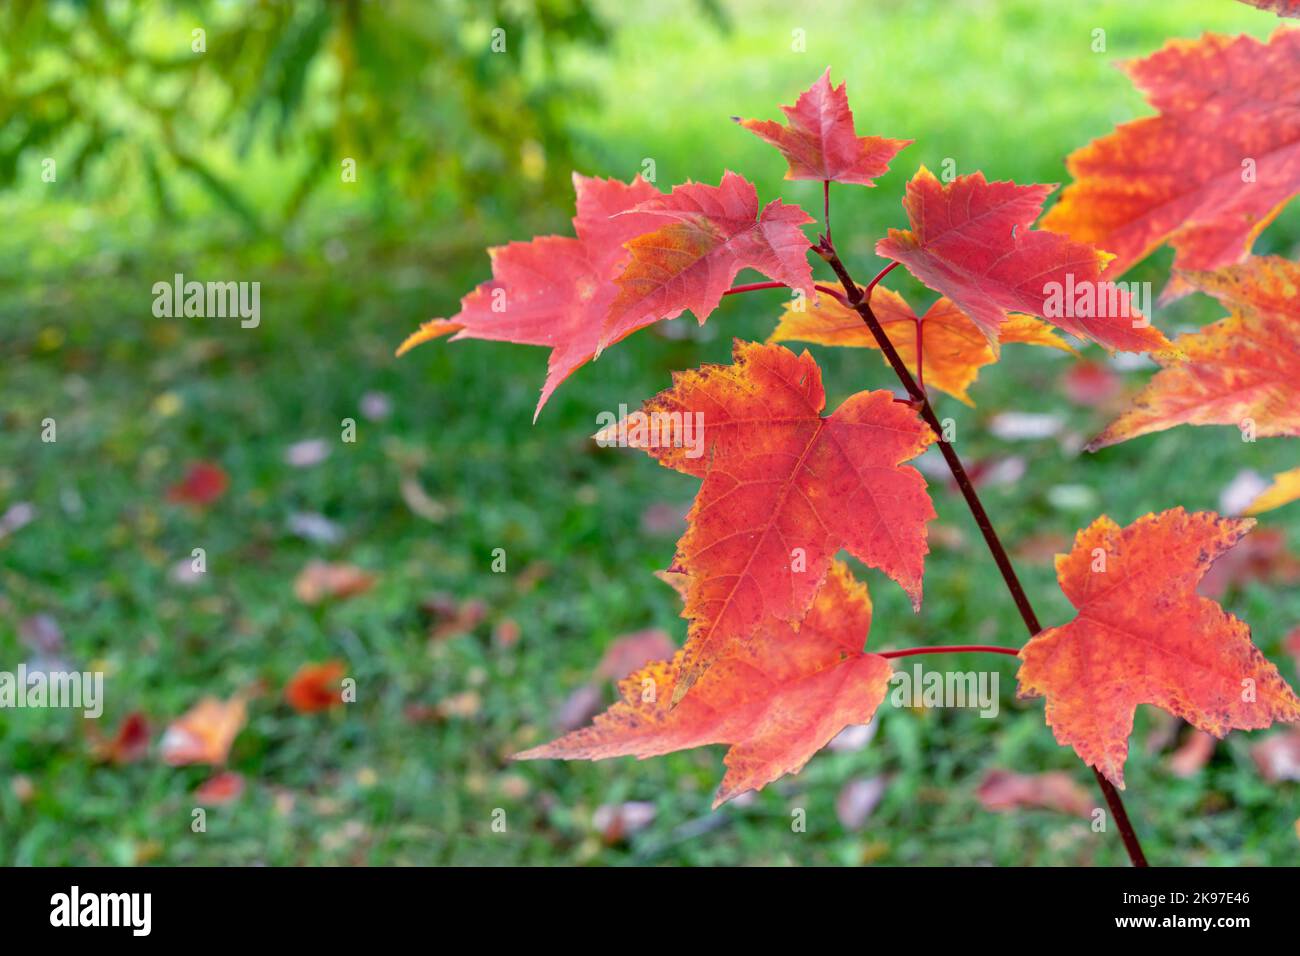 Red maple leaves on tree branches in autumn park. Stock Photo